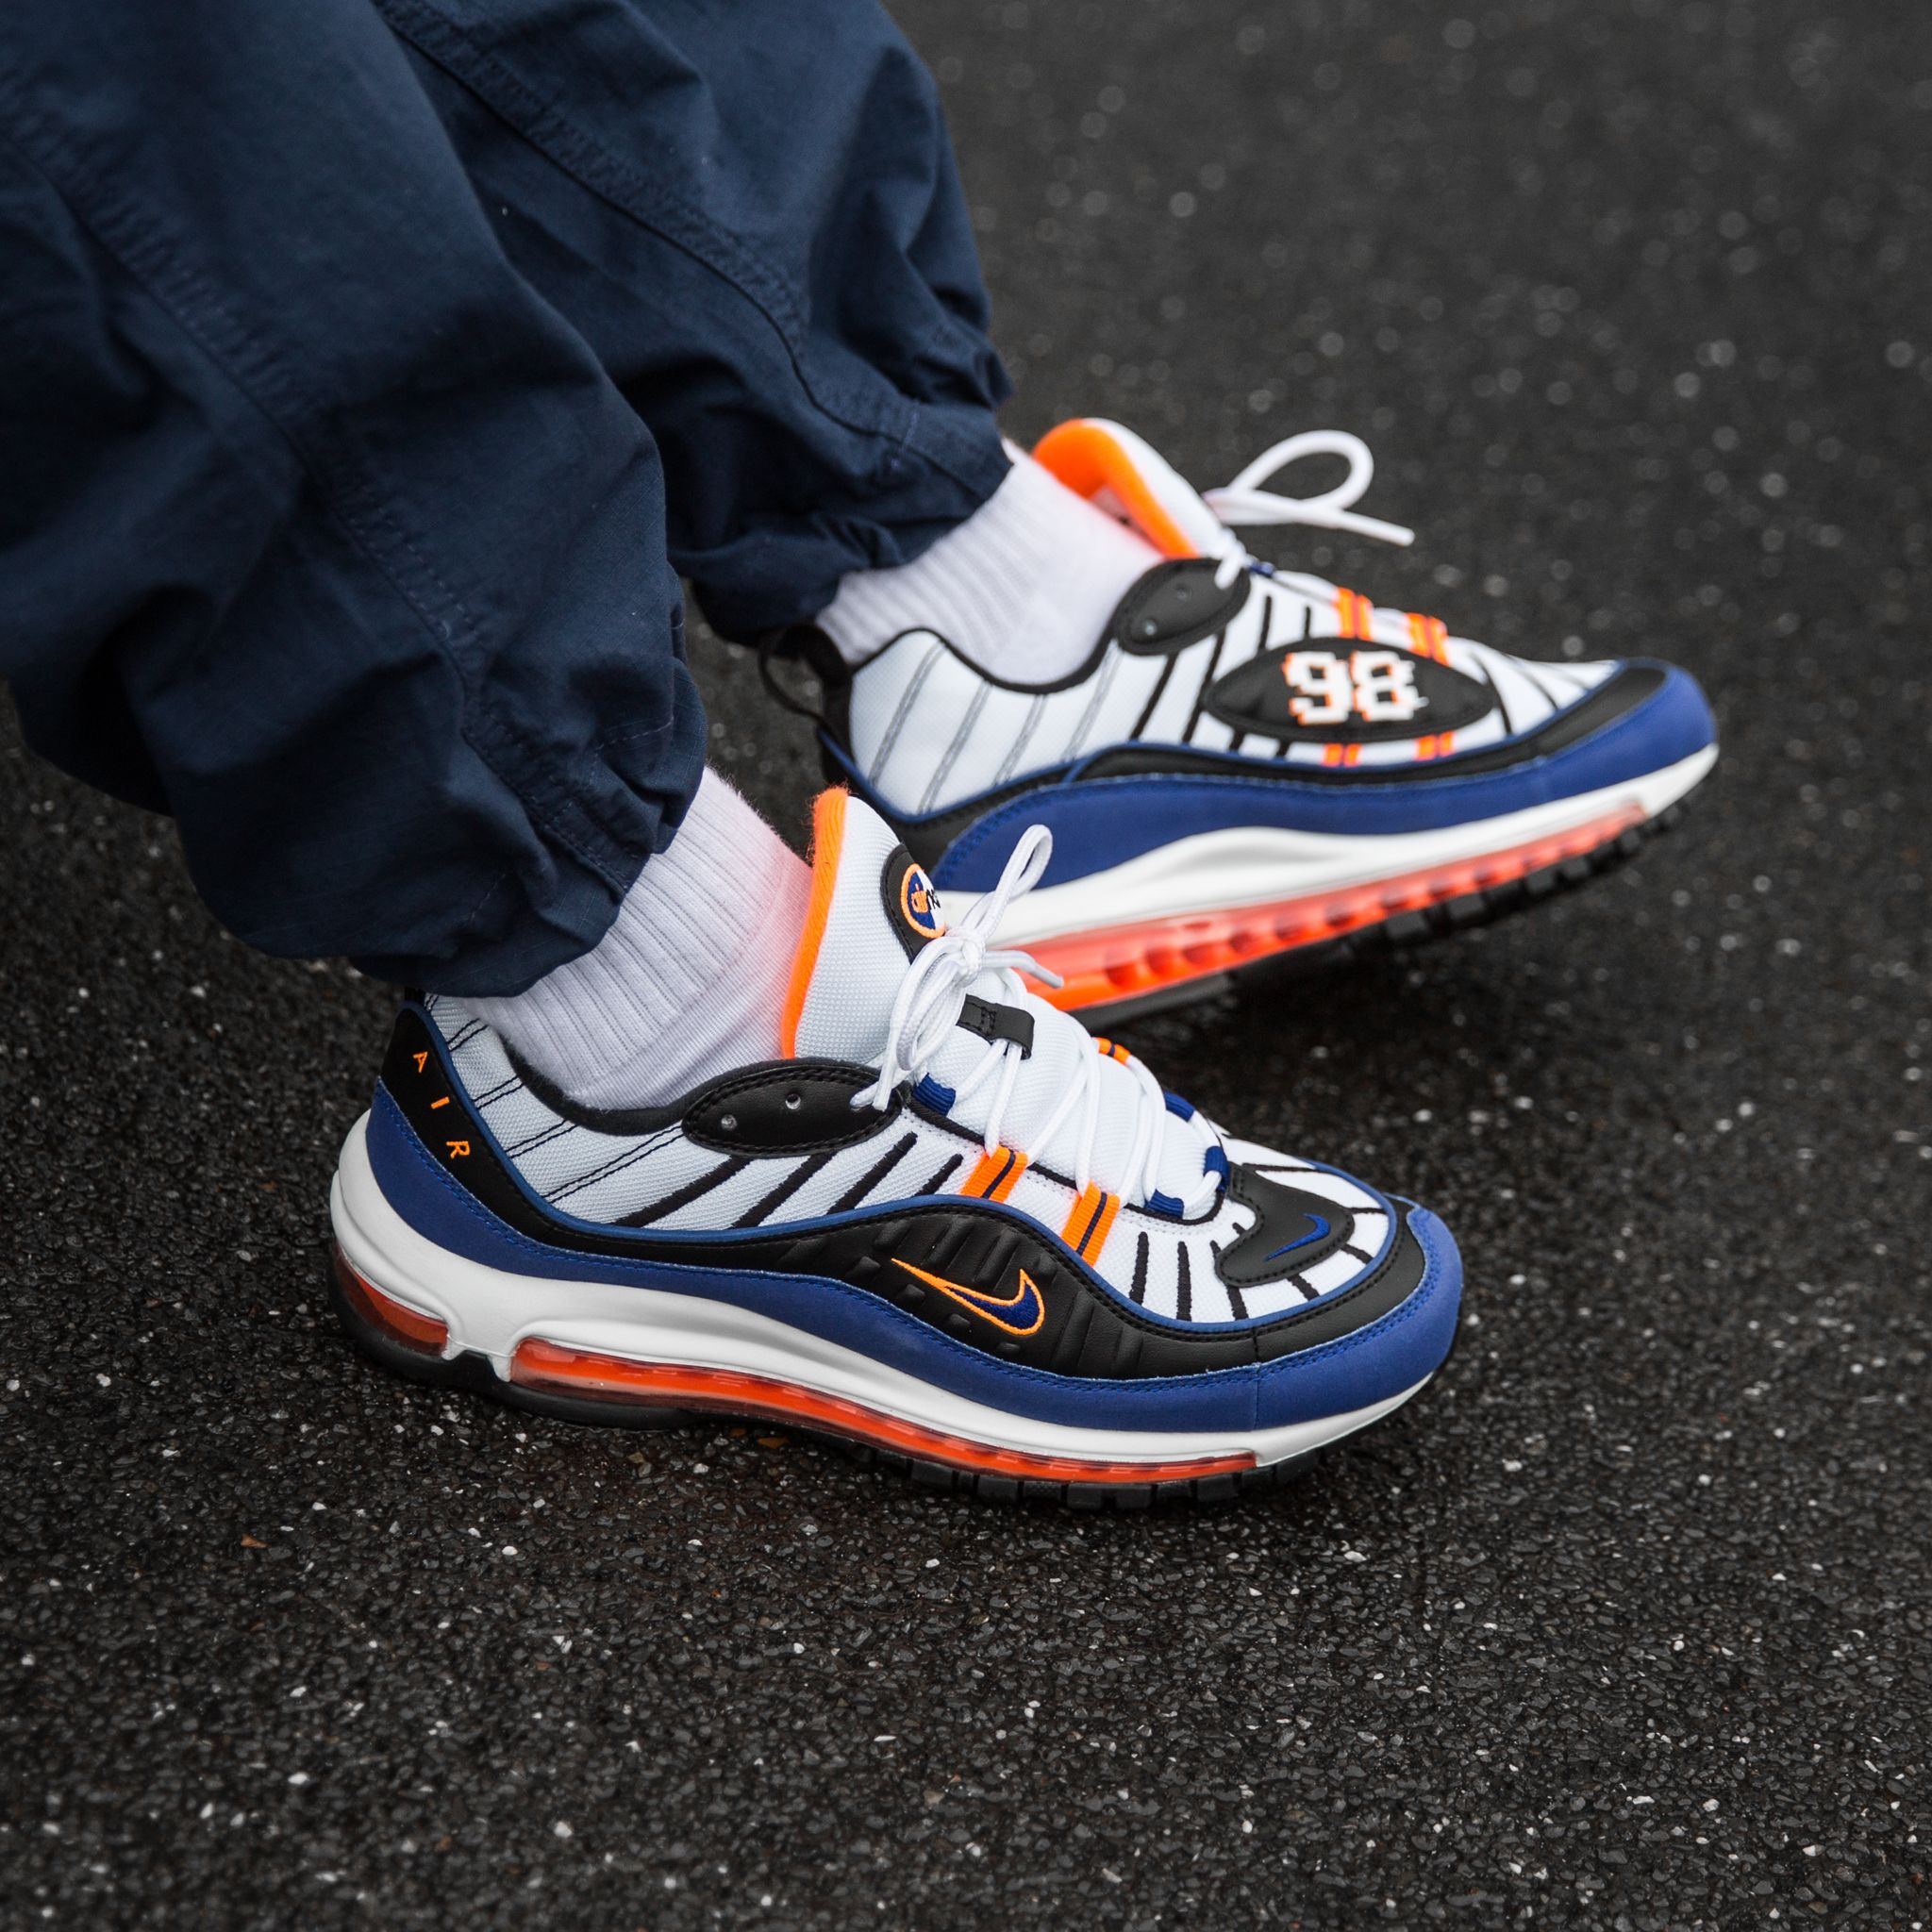 Titolo on Twitter: "Nike Air Max 98 in "White/Deep Royal Orange-Black" available for purchase ➡️ https://t.co/WBAGvjY3n4 #nike #airmax98 #am98 #nikeairmax98 https://t.co/qQoDezuE08" / Twitter